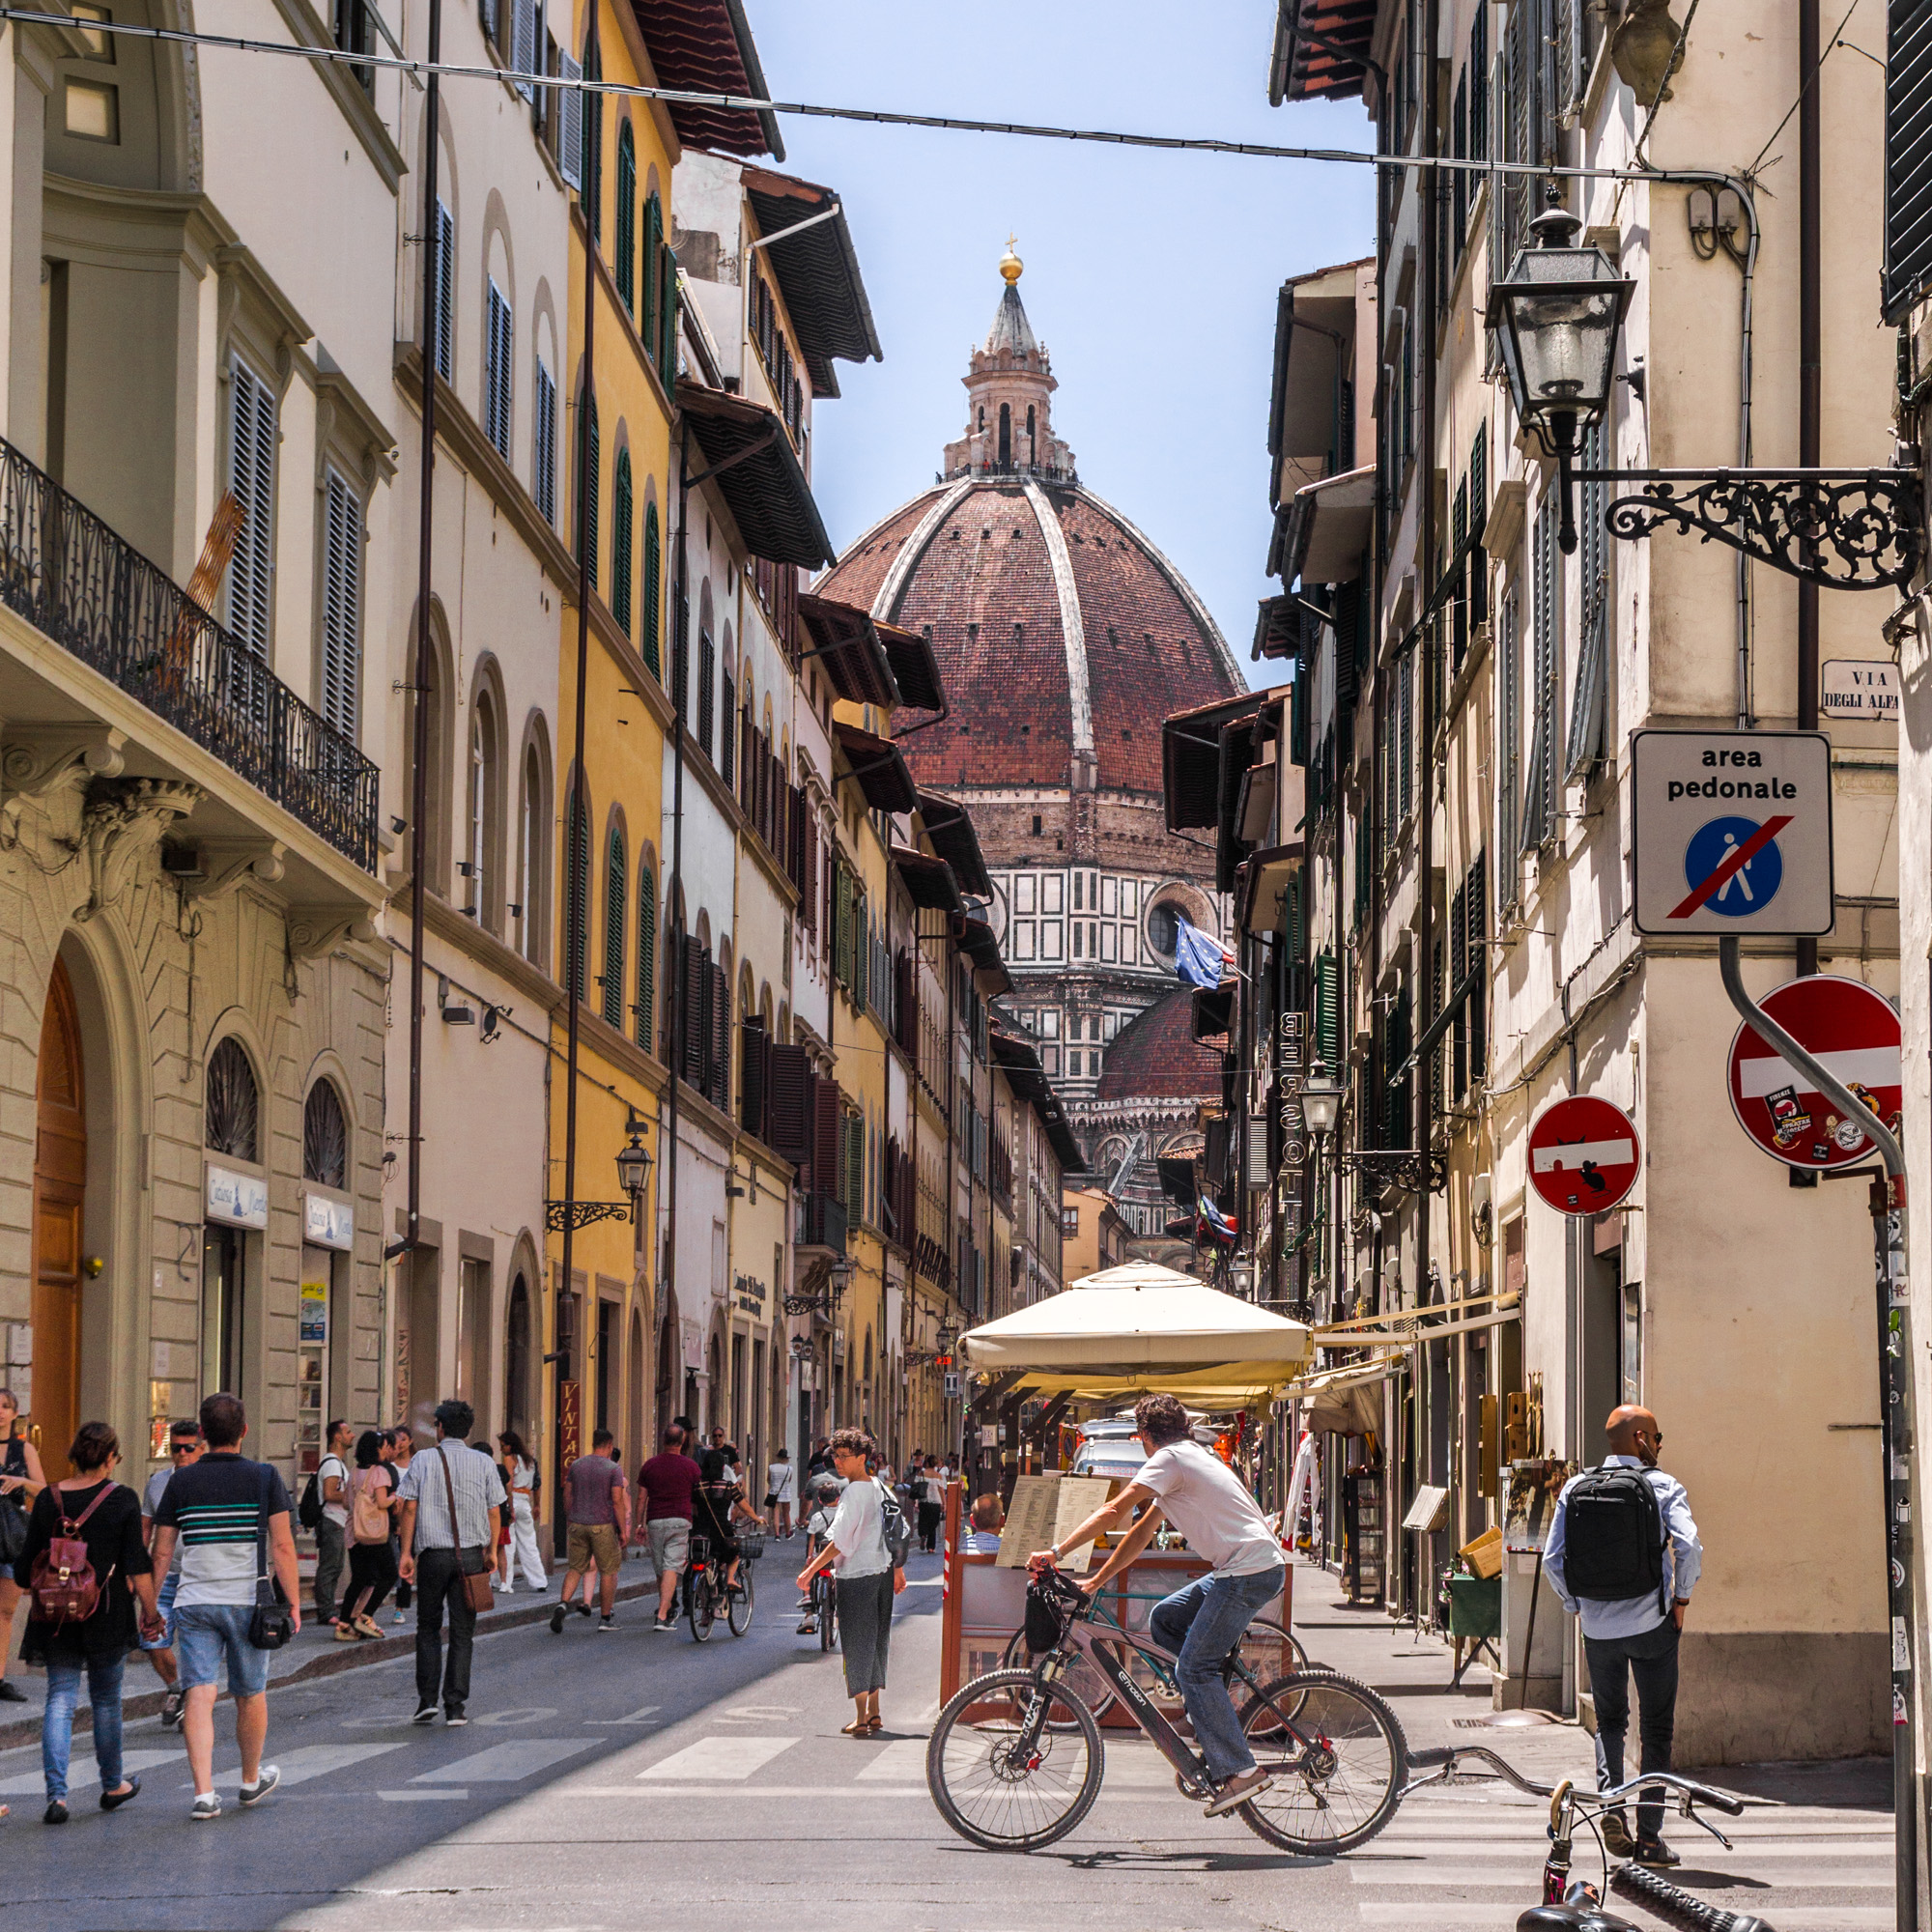 France/Italy roadtrip – Florence day 1